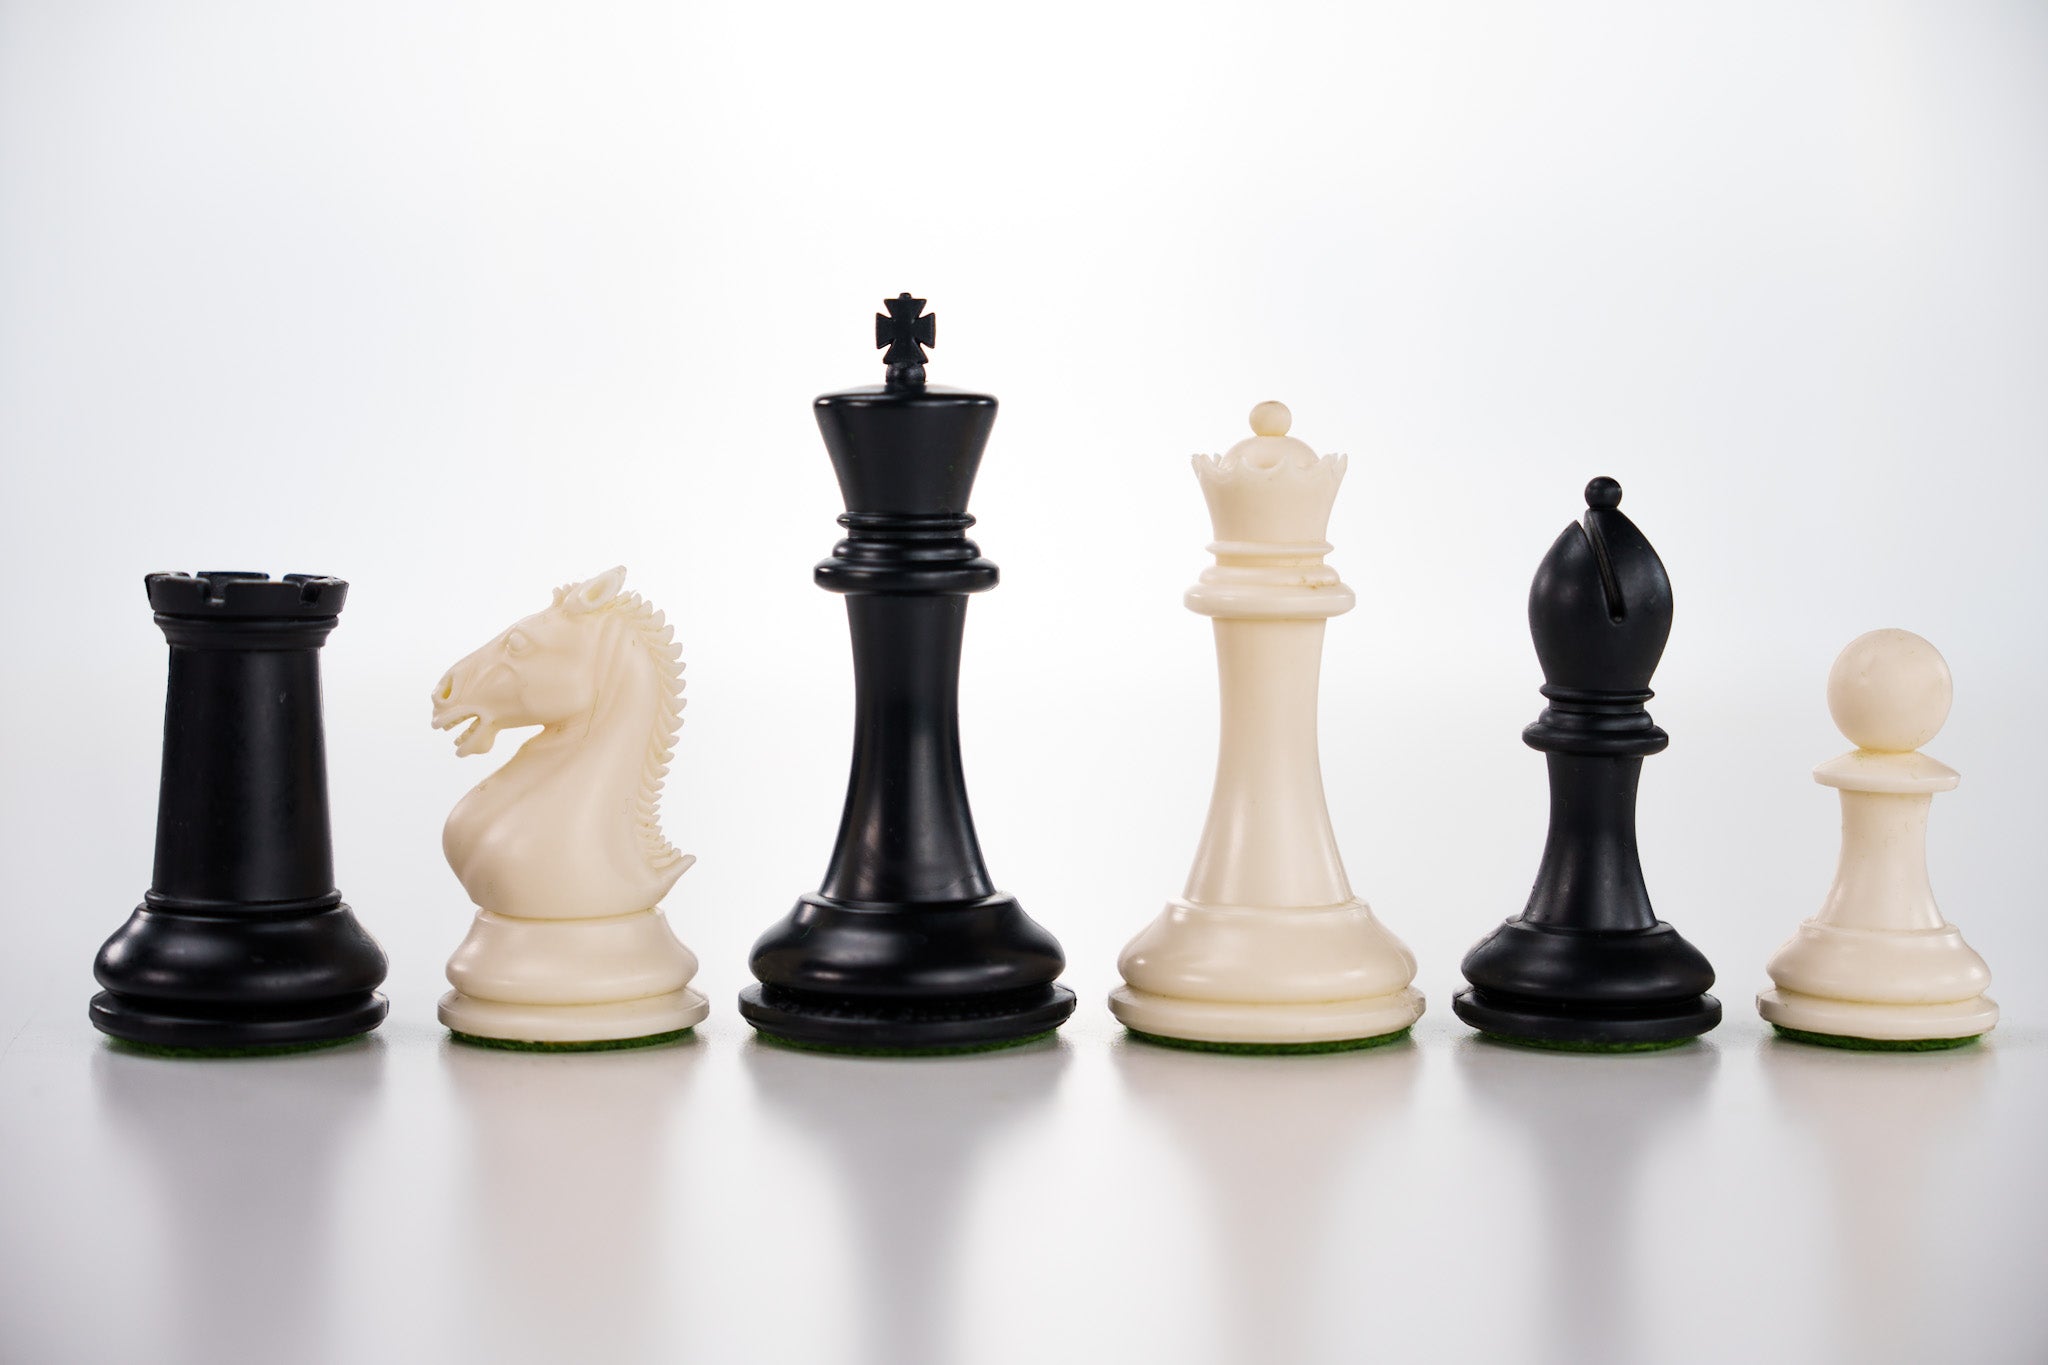 3 7/8" Hastings Black & White Chess Pieces - Piece - Chess-House